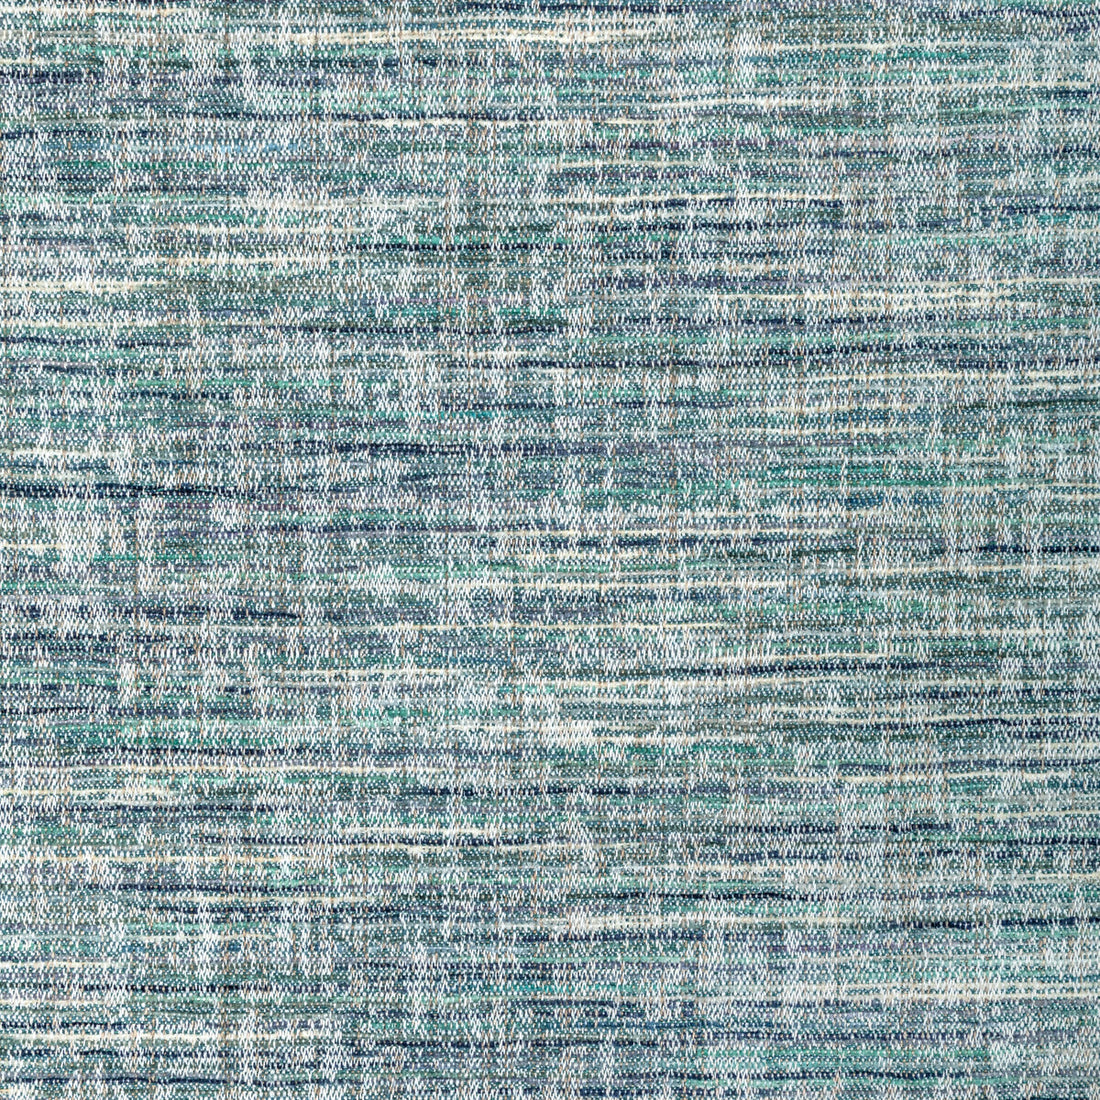 Bluff Trail fabric in lagoon color - pattern 36382.35.0 - by Kravet Smart in the Jeffrey Alan Marks Seascapes collection